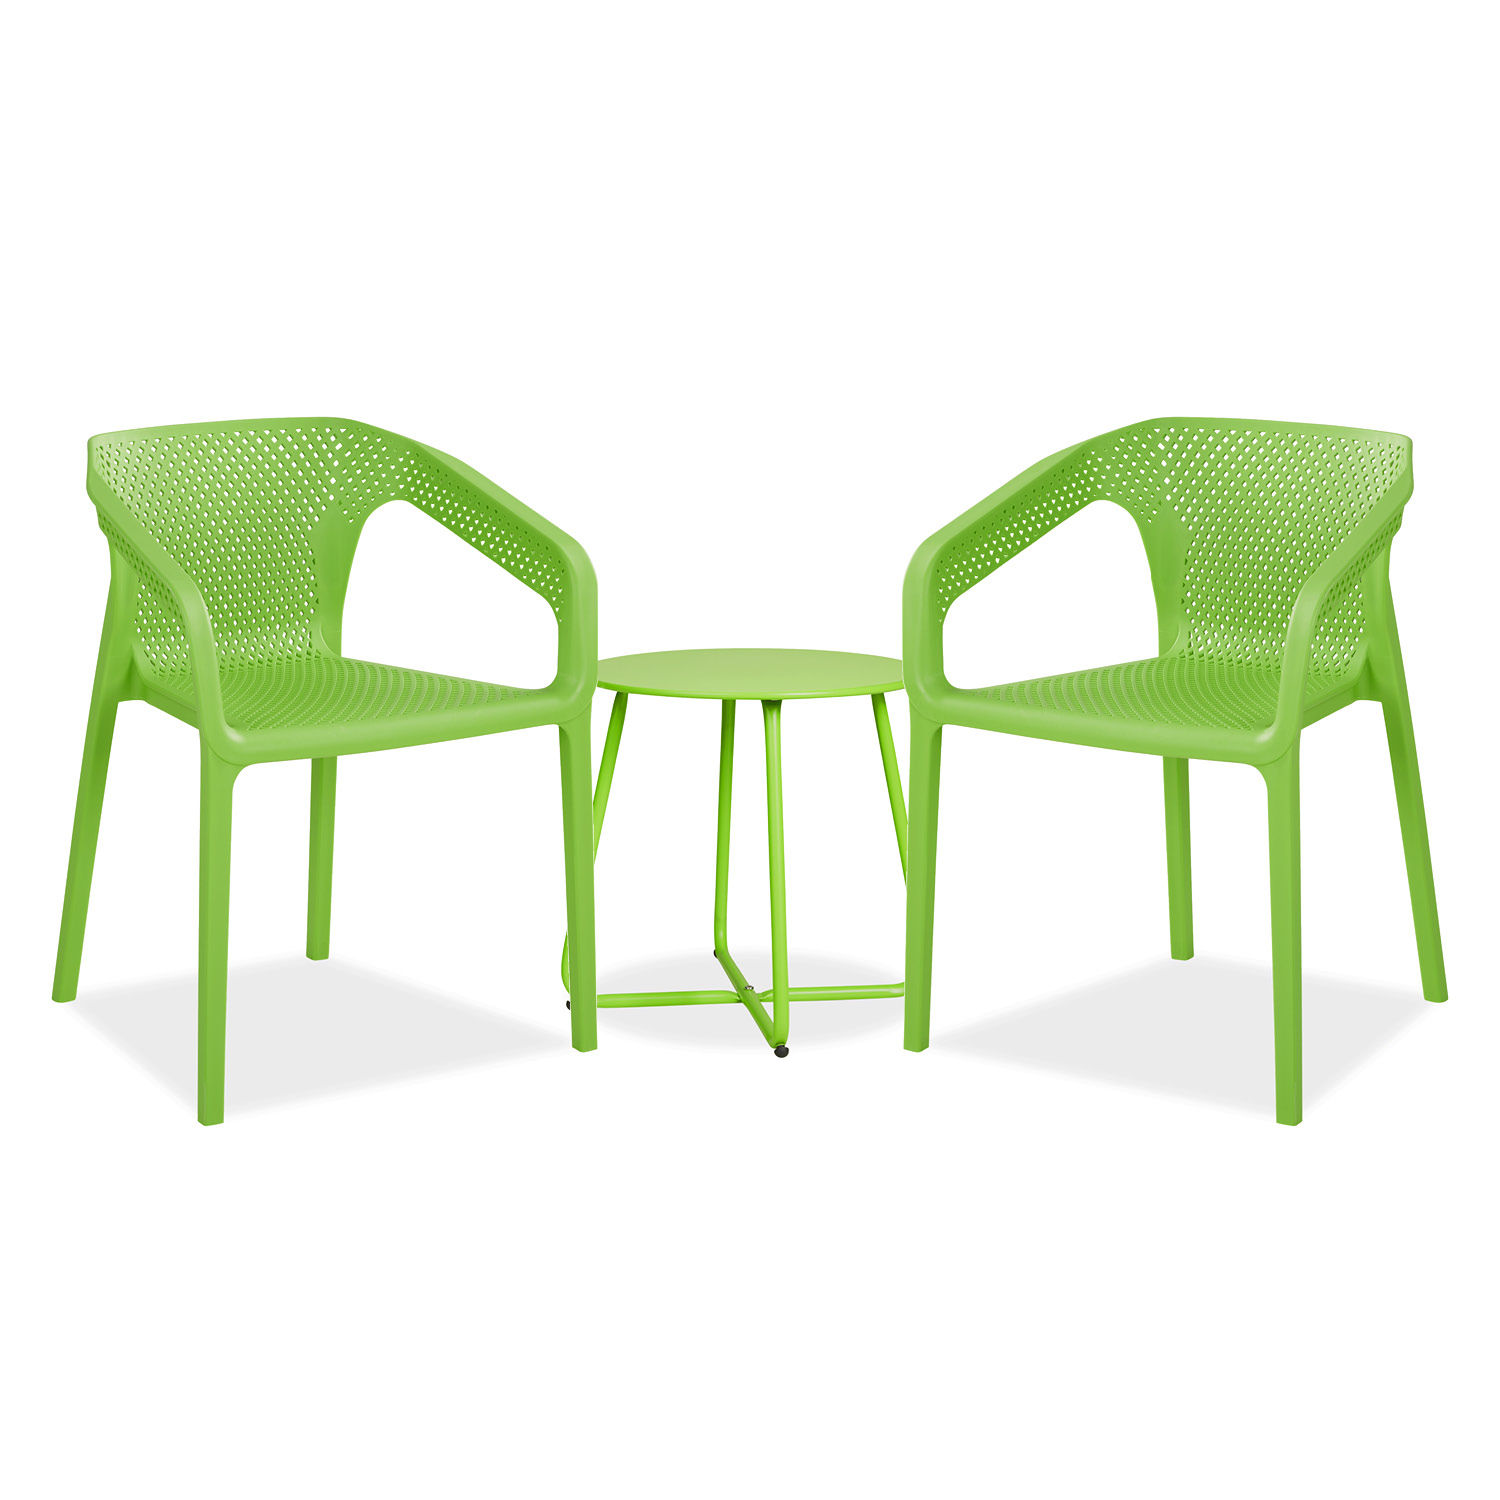 Garden furniture set Garden table and 2 chairs Bistro set Green Outdoor table and chairs Lounge chair Patio set